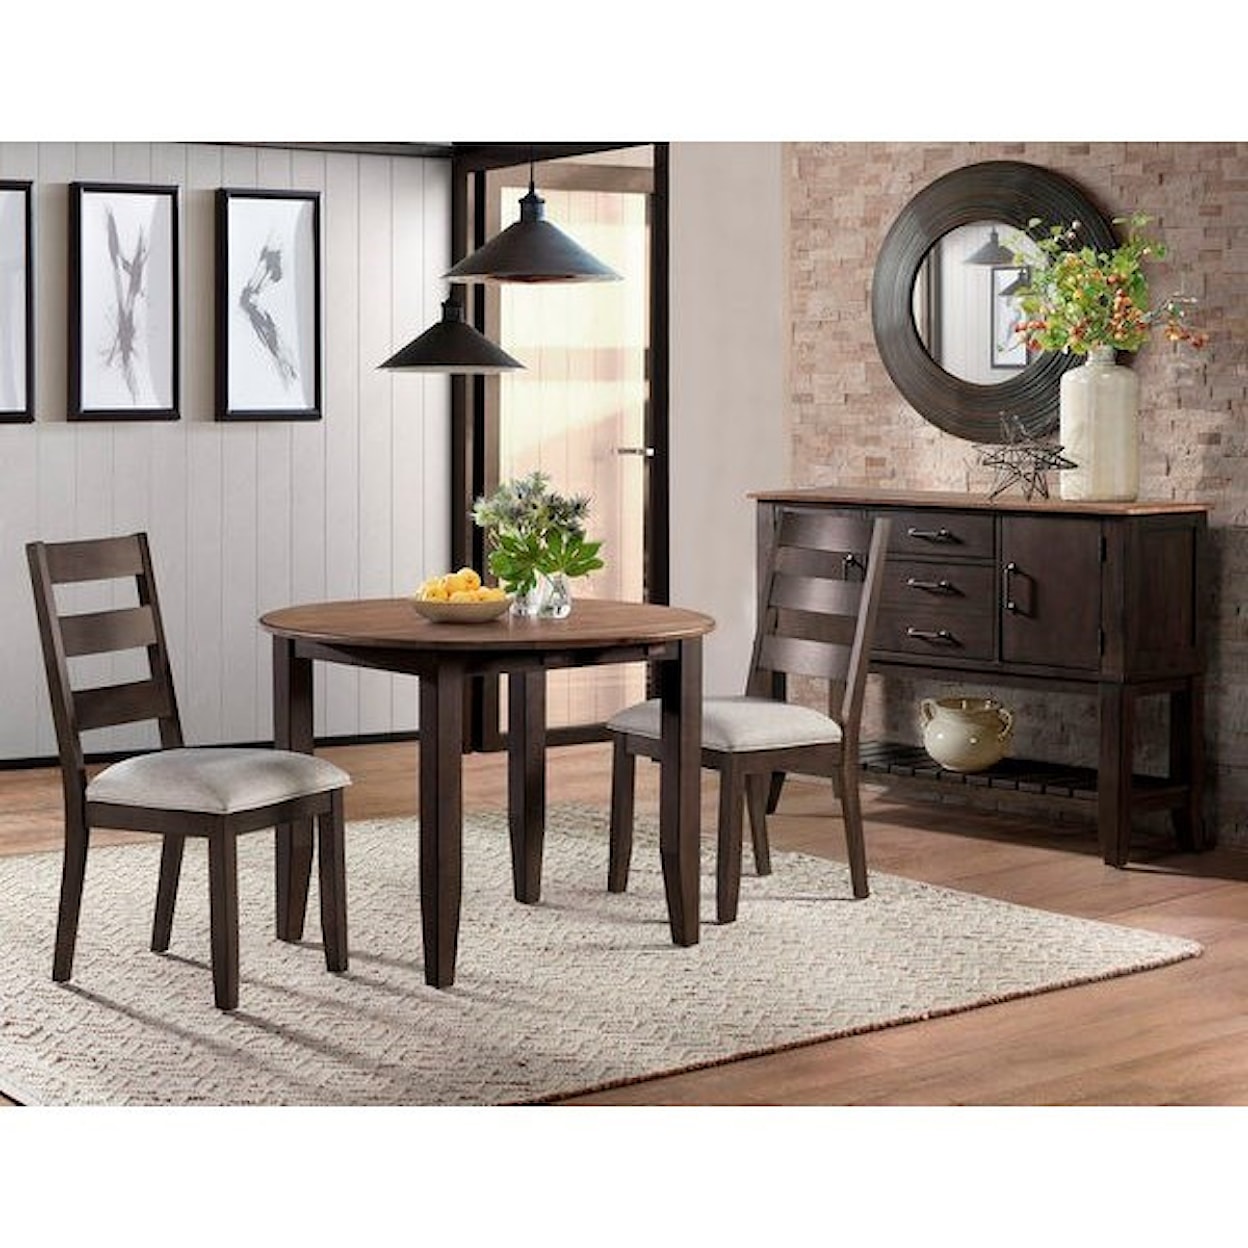 Intercon 31217 Round Dining Table